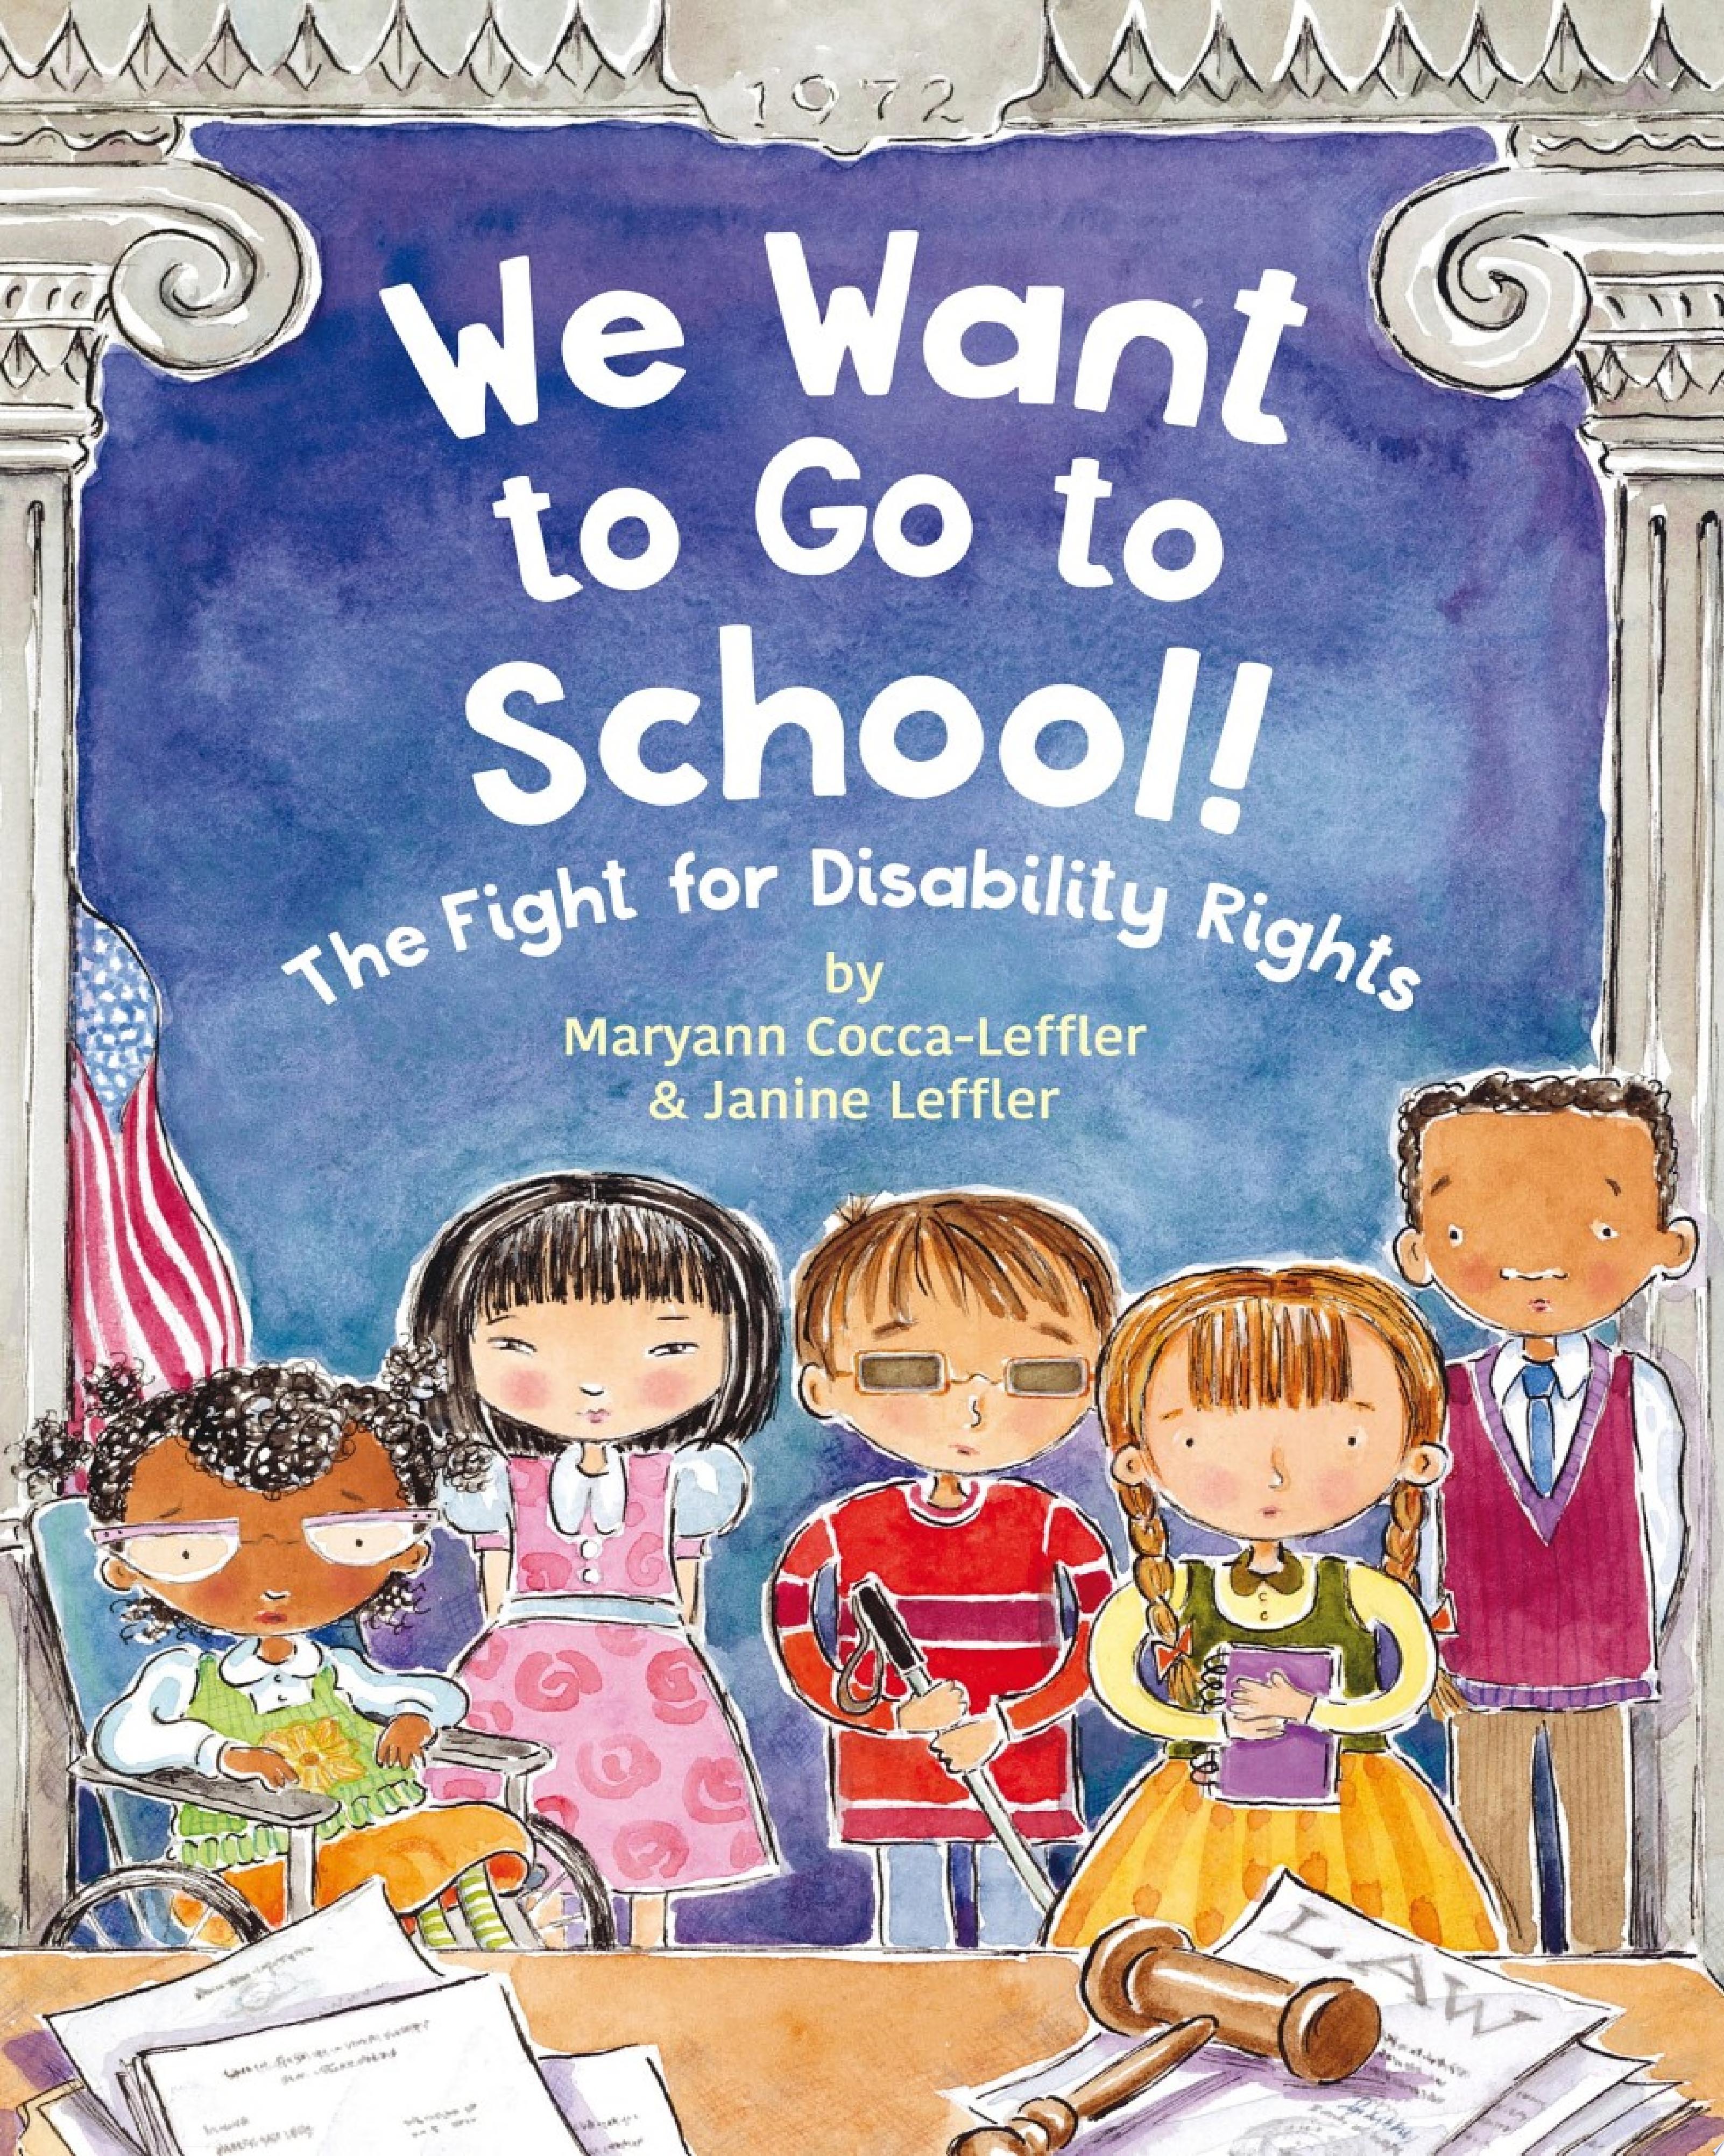 Image for "We Want to Go to School!"